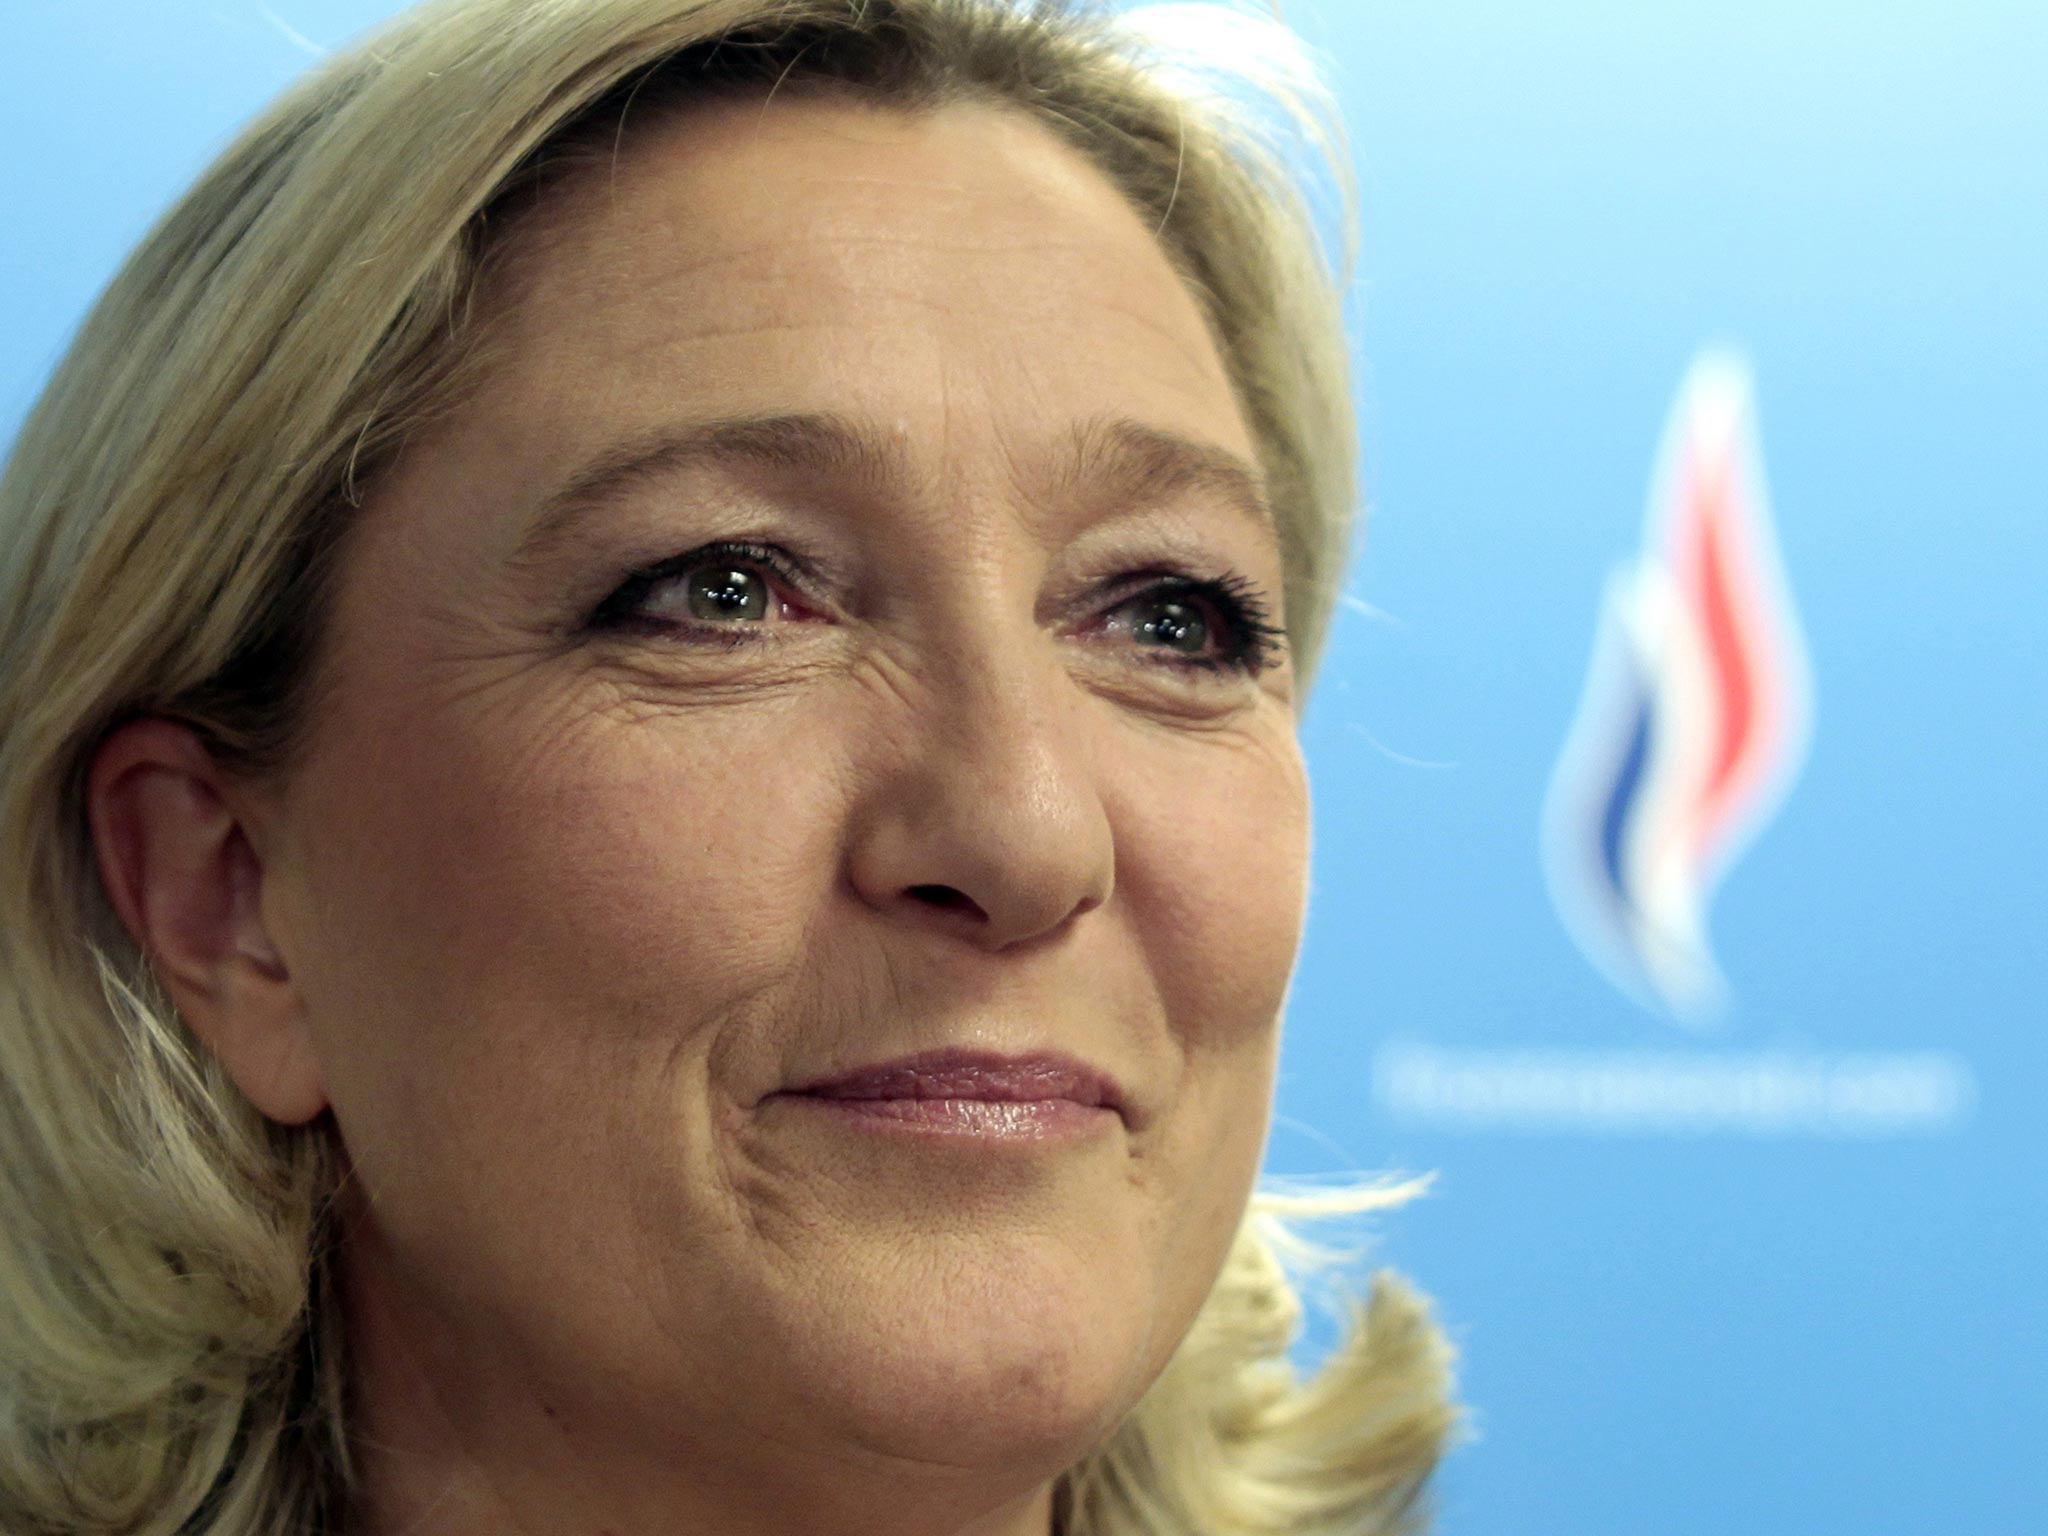 Marine Le Pen, the National Front leader, claims to have cleaned up the far-right party since taking over